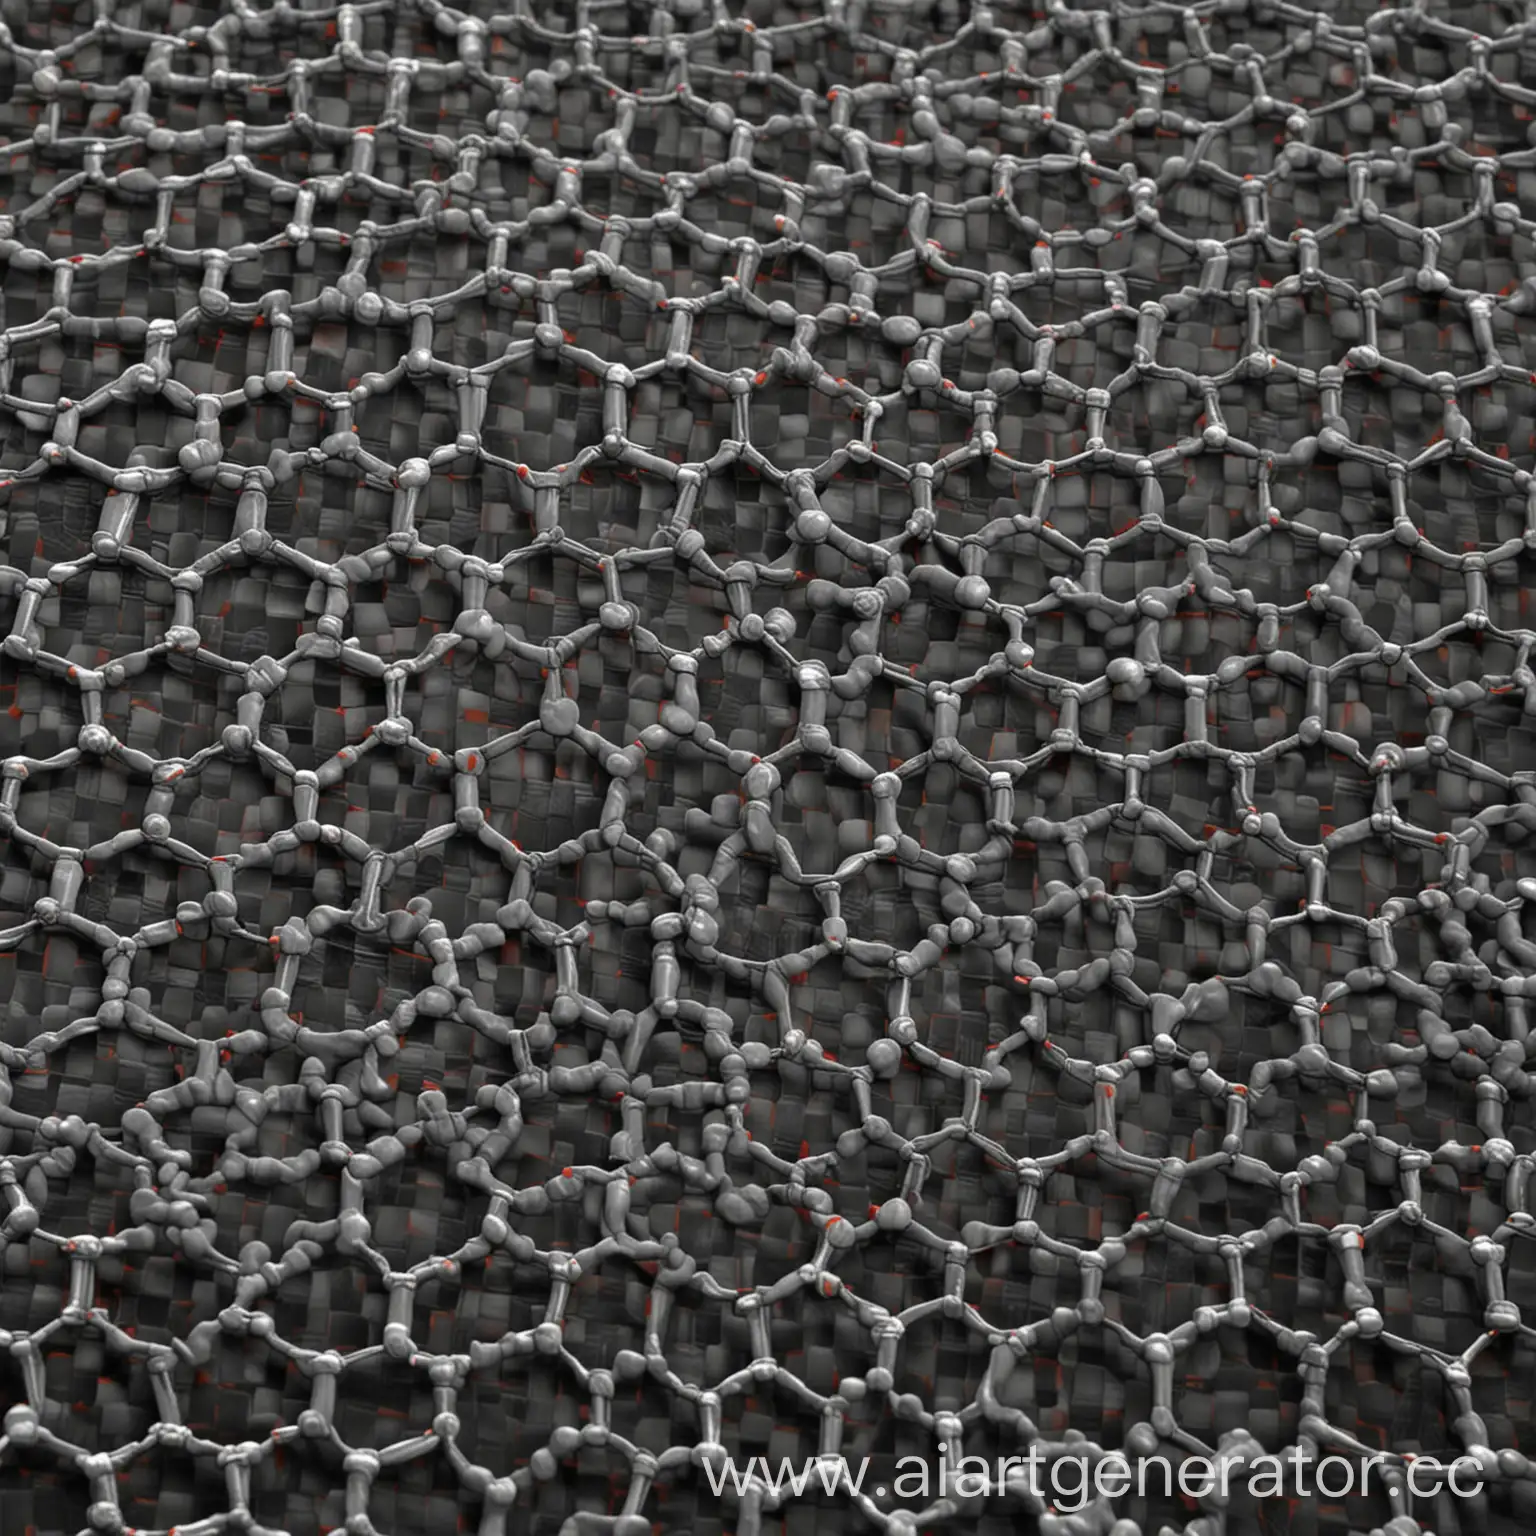 Composite-Image-of-Graphene-and-Polymer-Materials